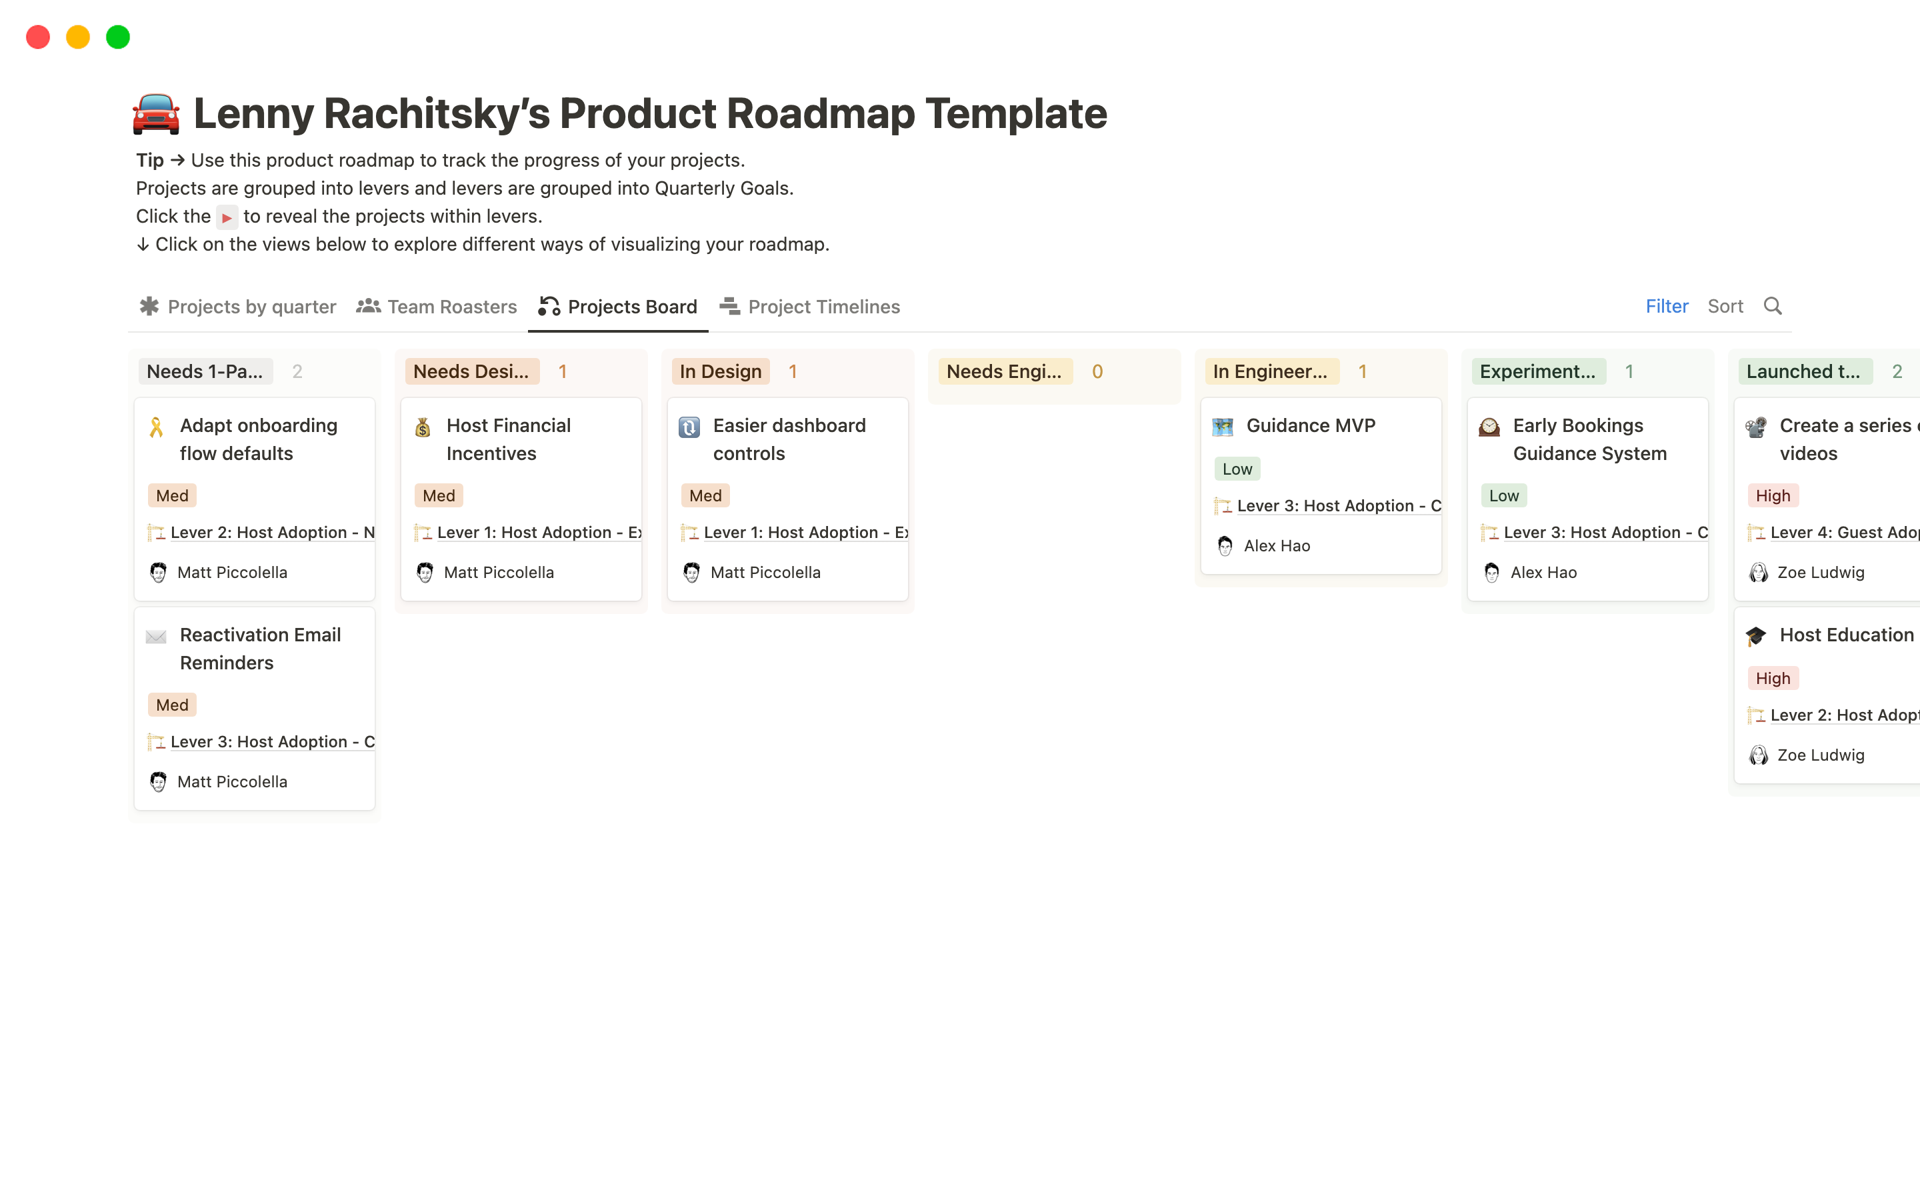 Use this product roadmap to track the progress of your projects.